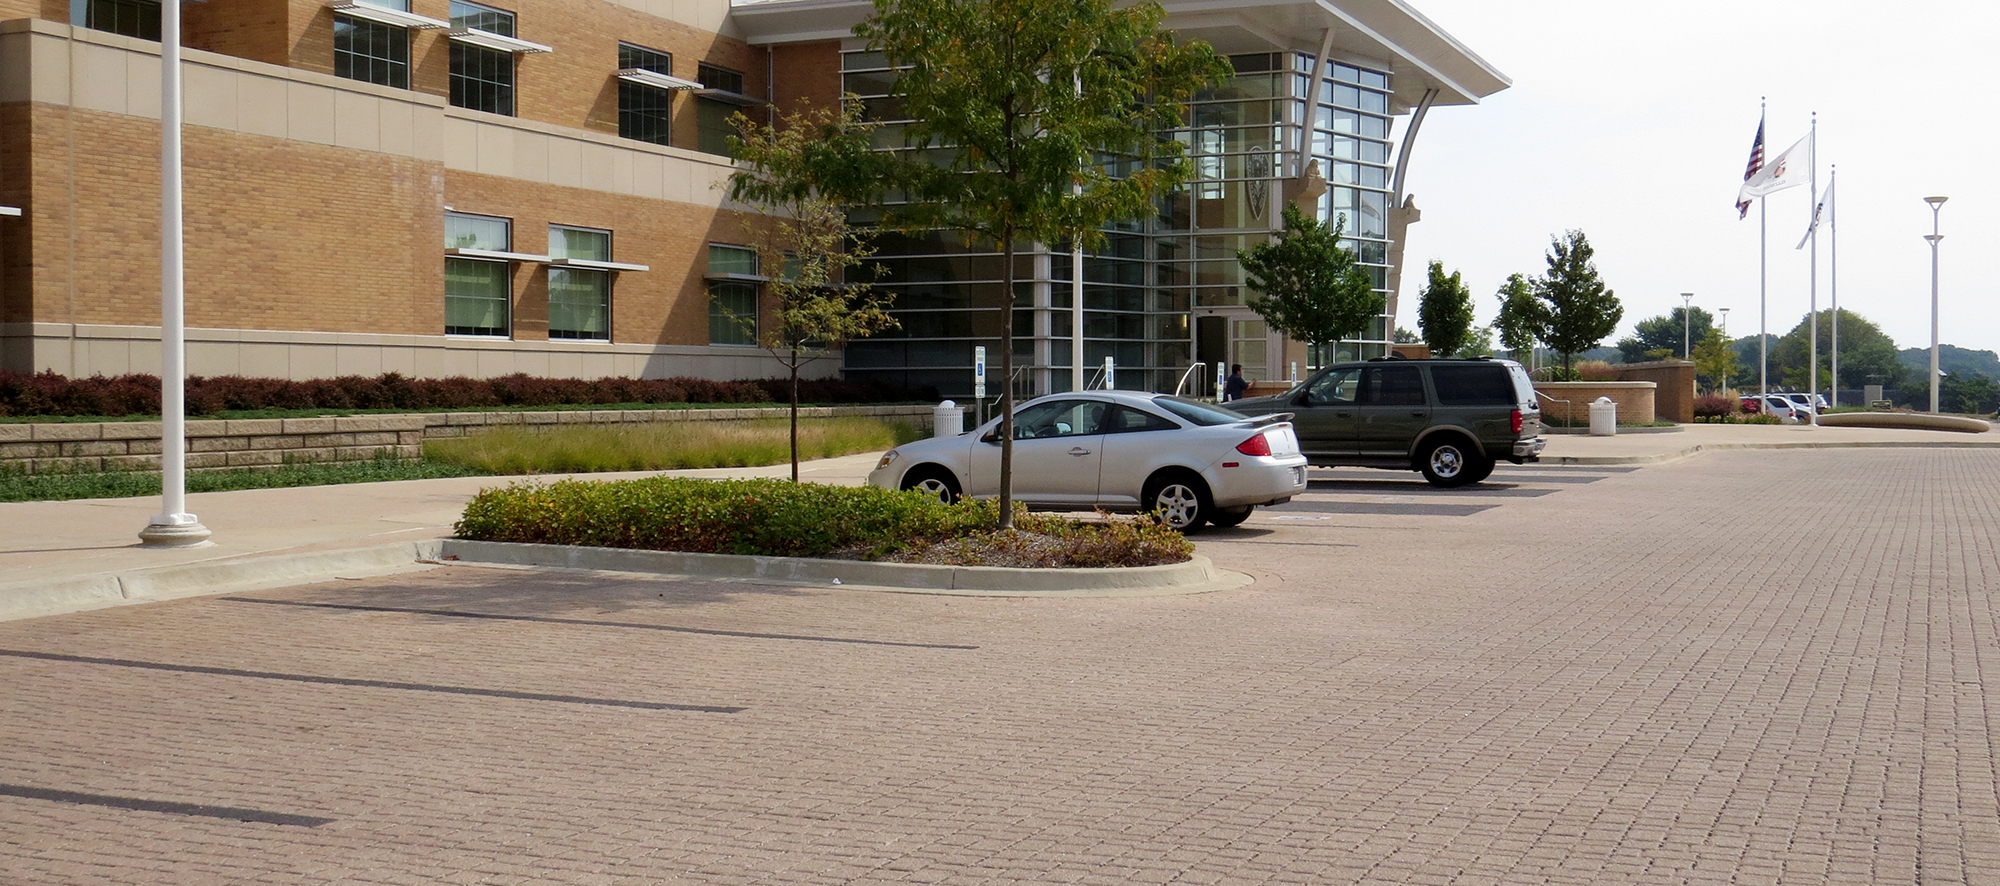 Vehicles in front of a brick and glass building are parked on Eco-Optiloc permeable pavers with dark gray marking the parking spots.